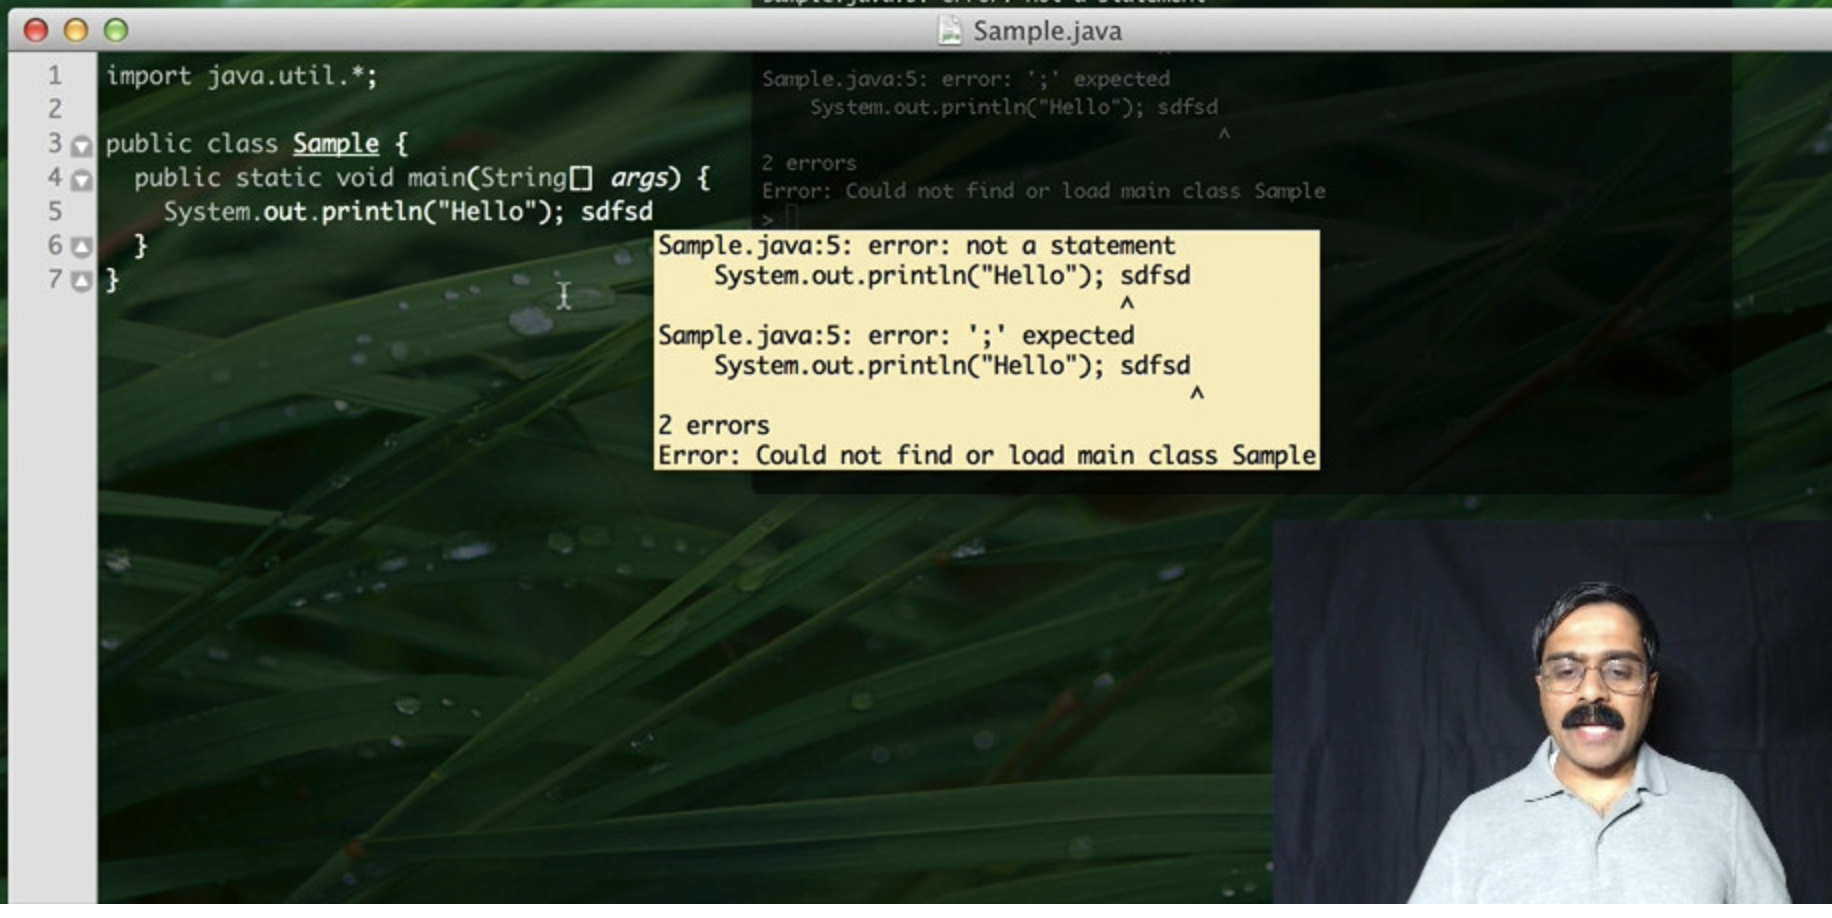 A screenshot from a talk by Venkat Subramaniam showing code snippets